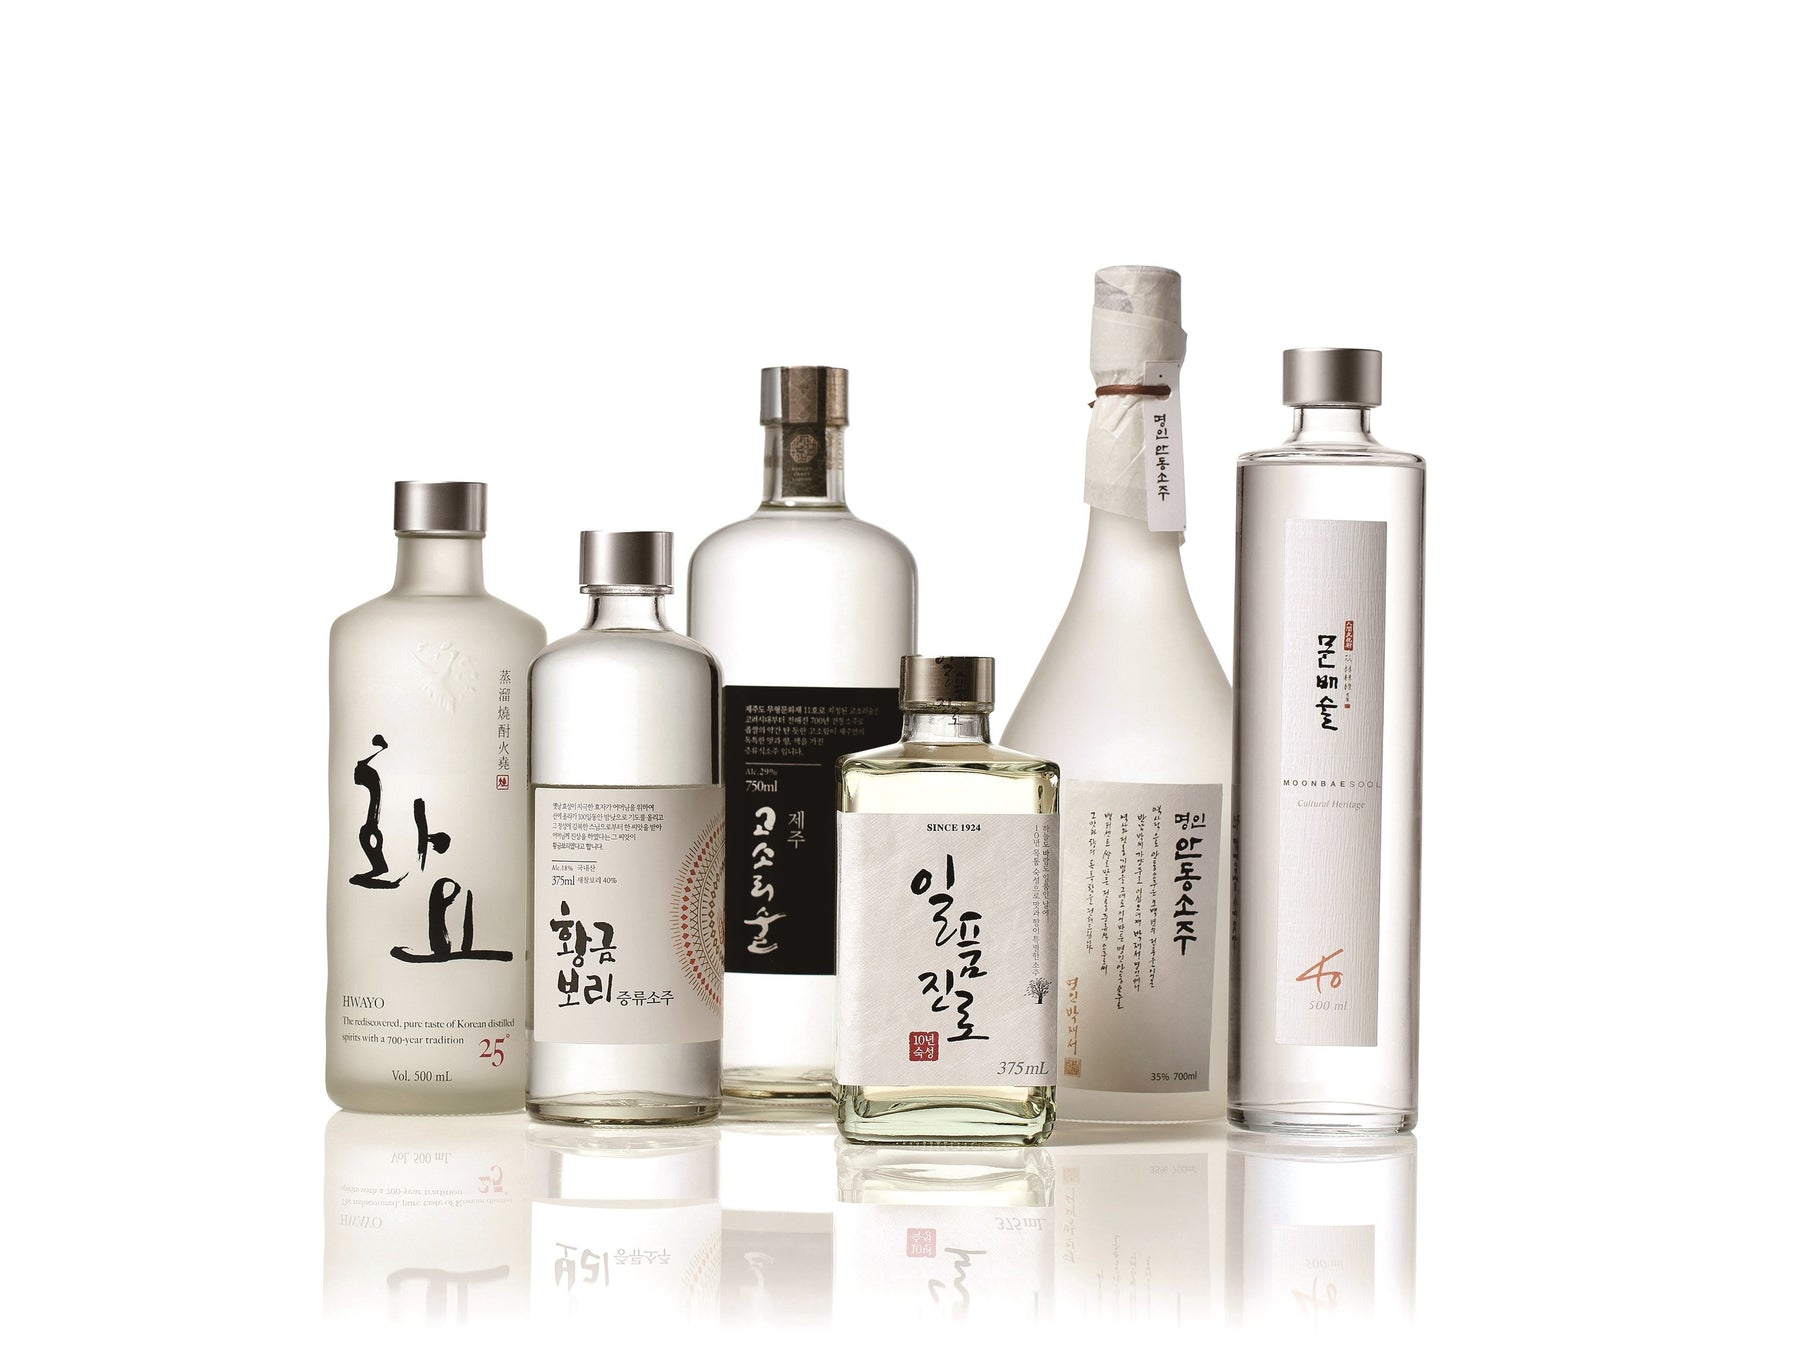 6 Different bottles of Korean Soju lined up, showcasing the large selection of Soju available to order online at Tipxy.com